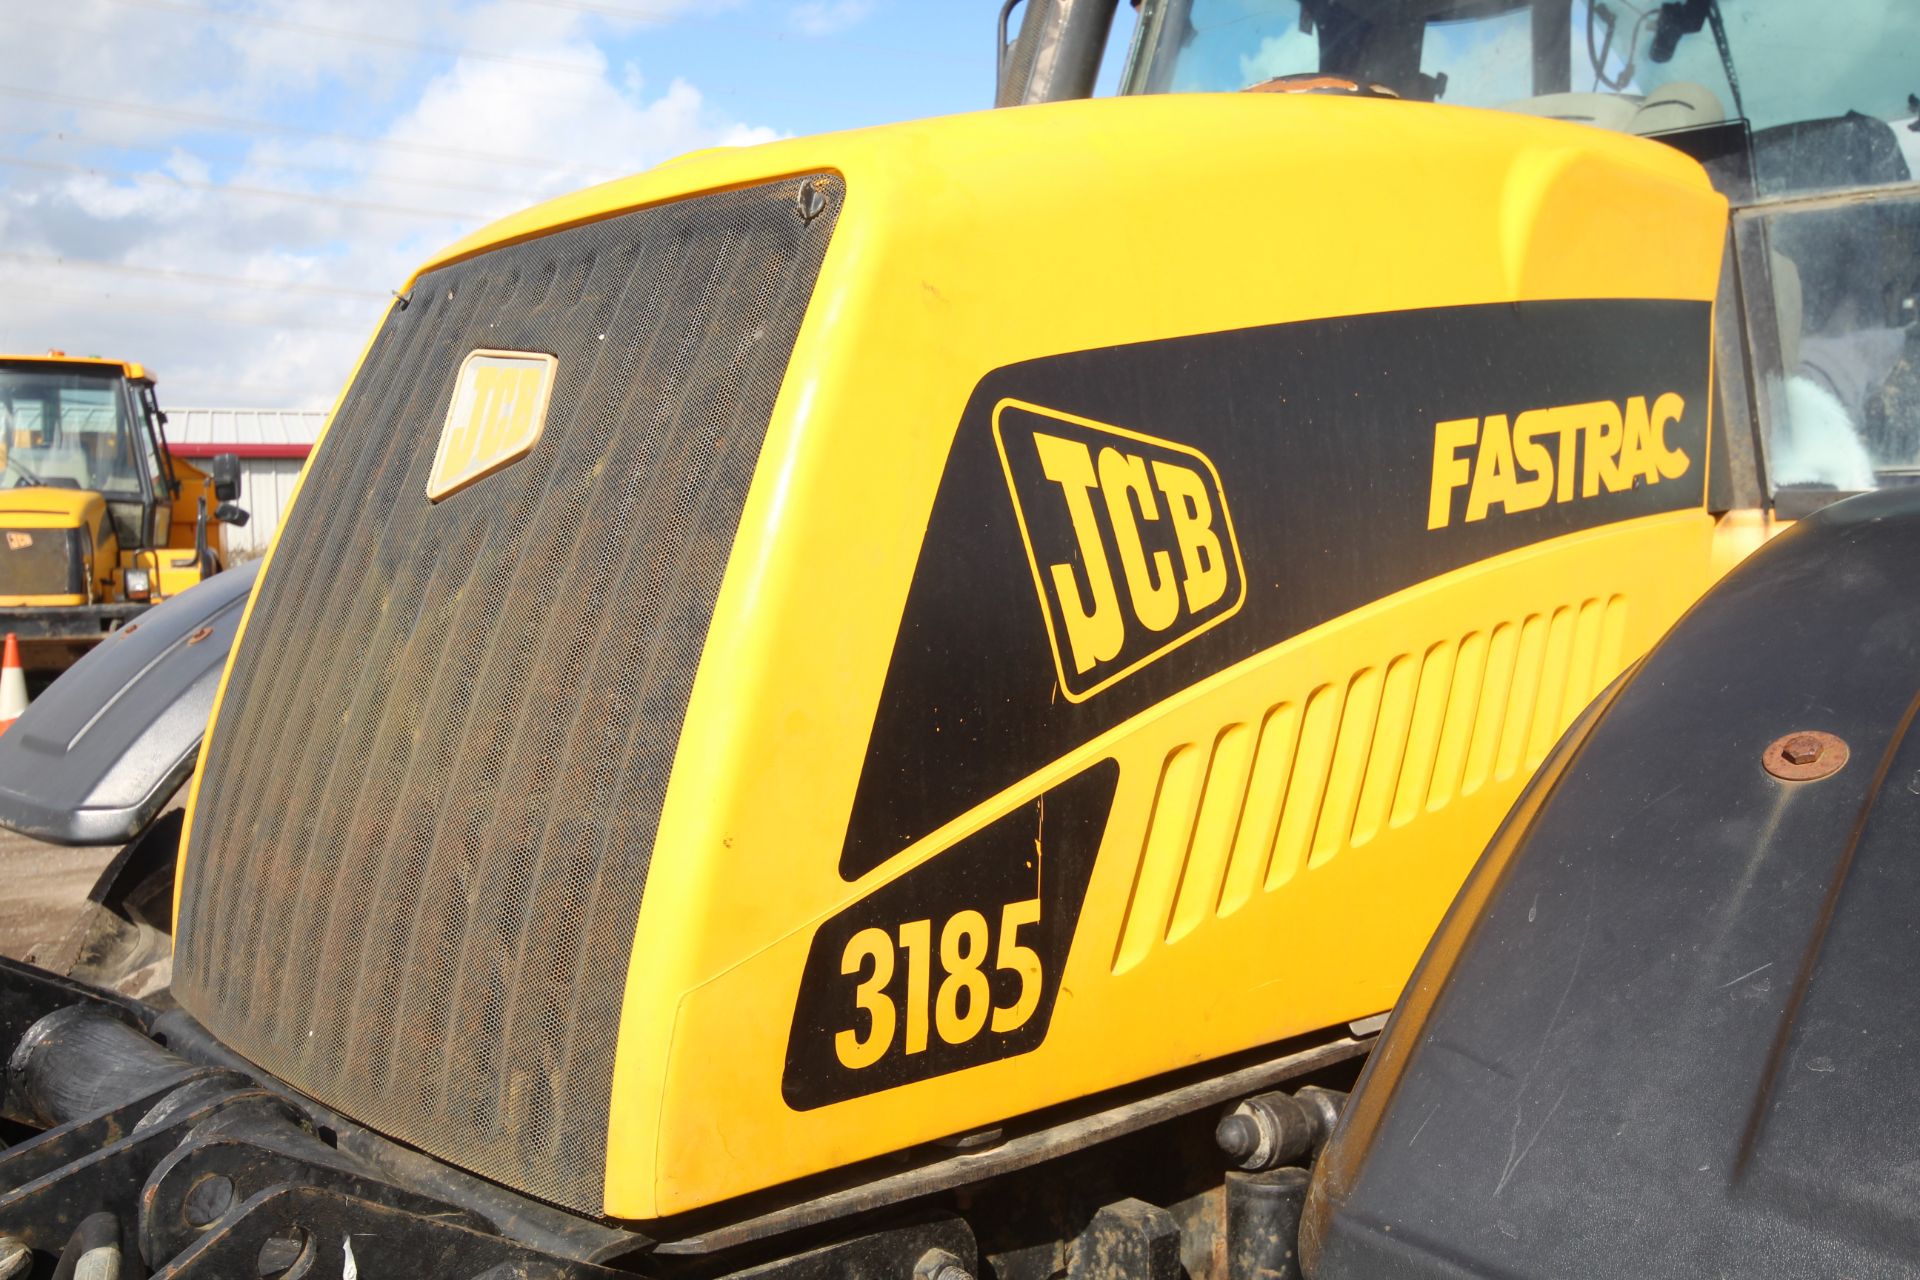 JCB Fastrac 3185 Autoshift 4WD tractor. Registration X642 AHT. Date of first registration 04/09/ - Image 14 of 71